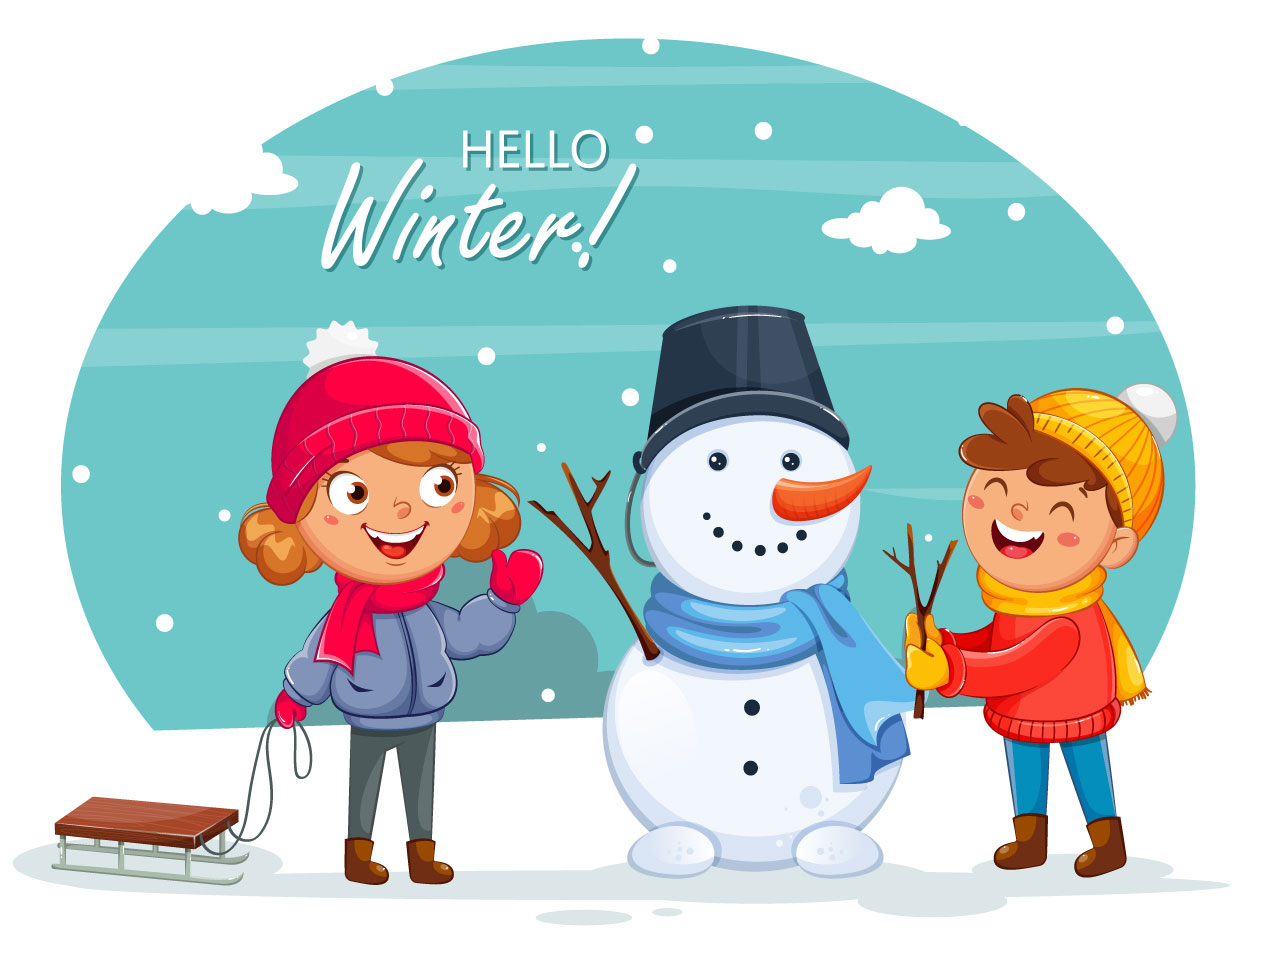 Merry christmas greeting card with cheerful kids playing with snowman cute cartoon characters hello winter illustration